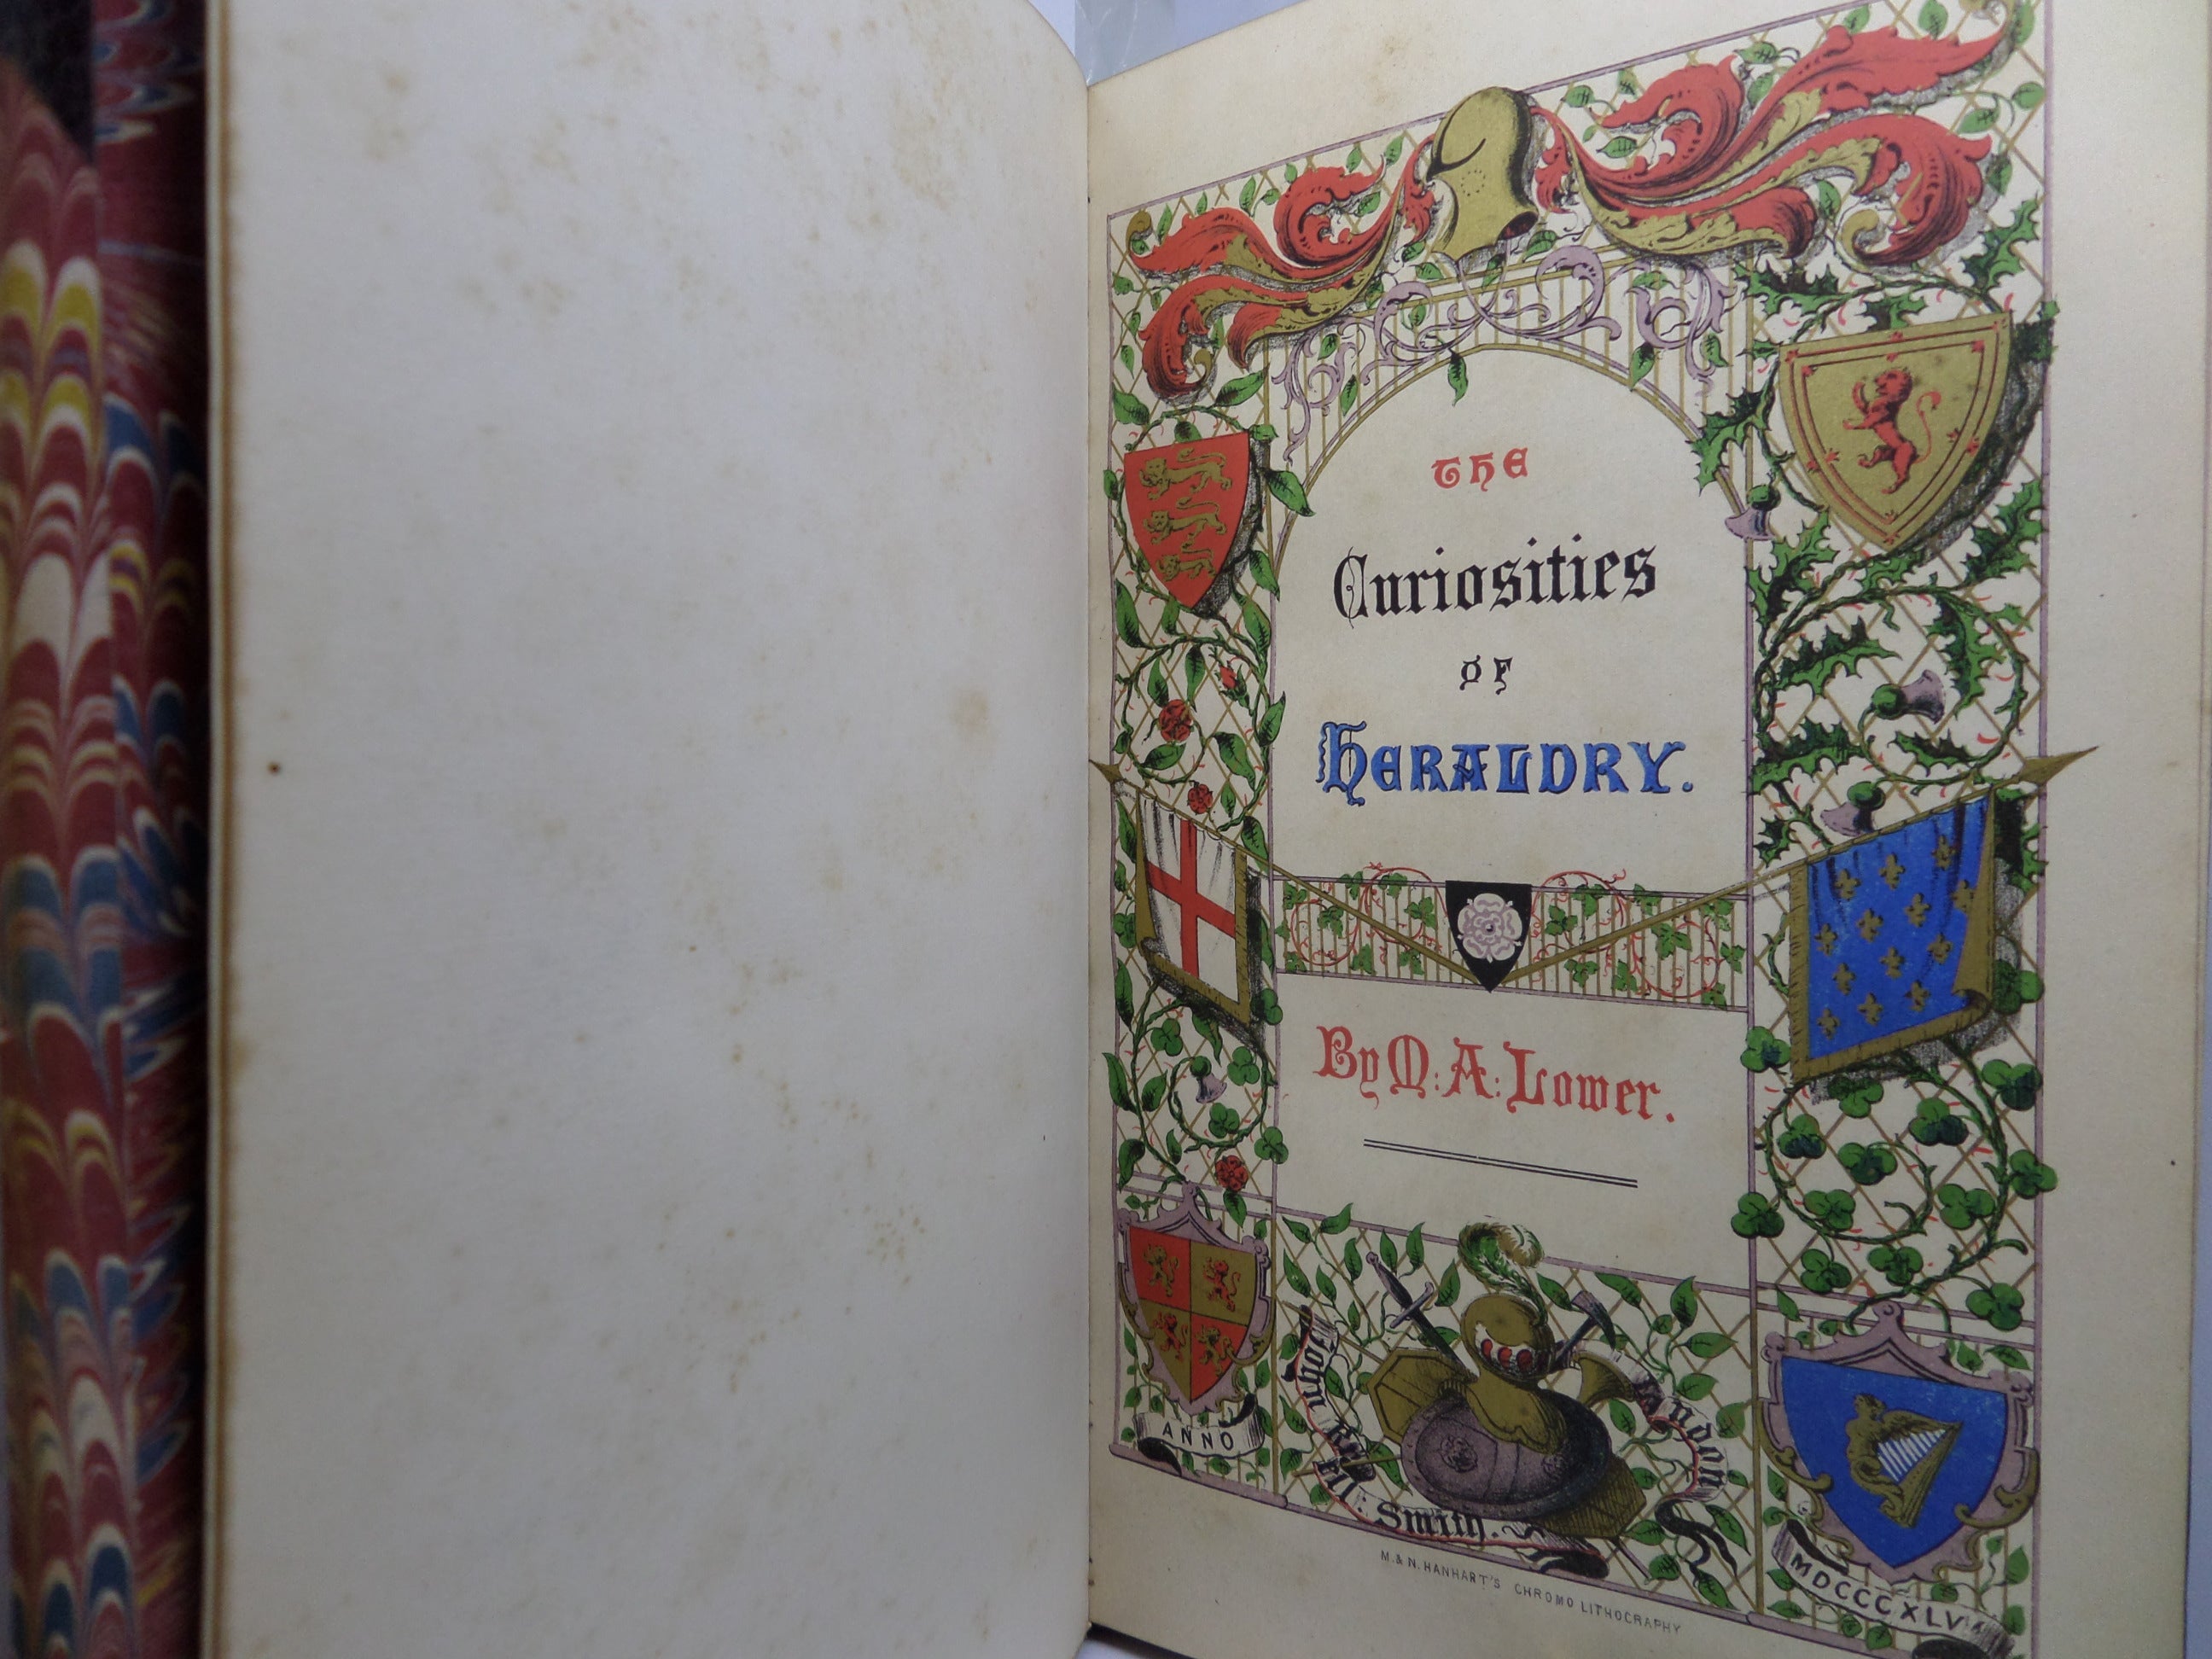 THE CURIOSITIES OF HERALDRY BY MARK LOWER 1845 ROGER DE COVERLY FINE BINDING